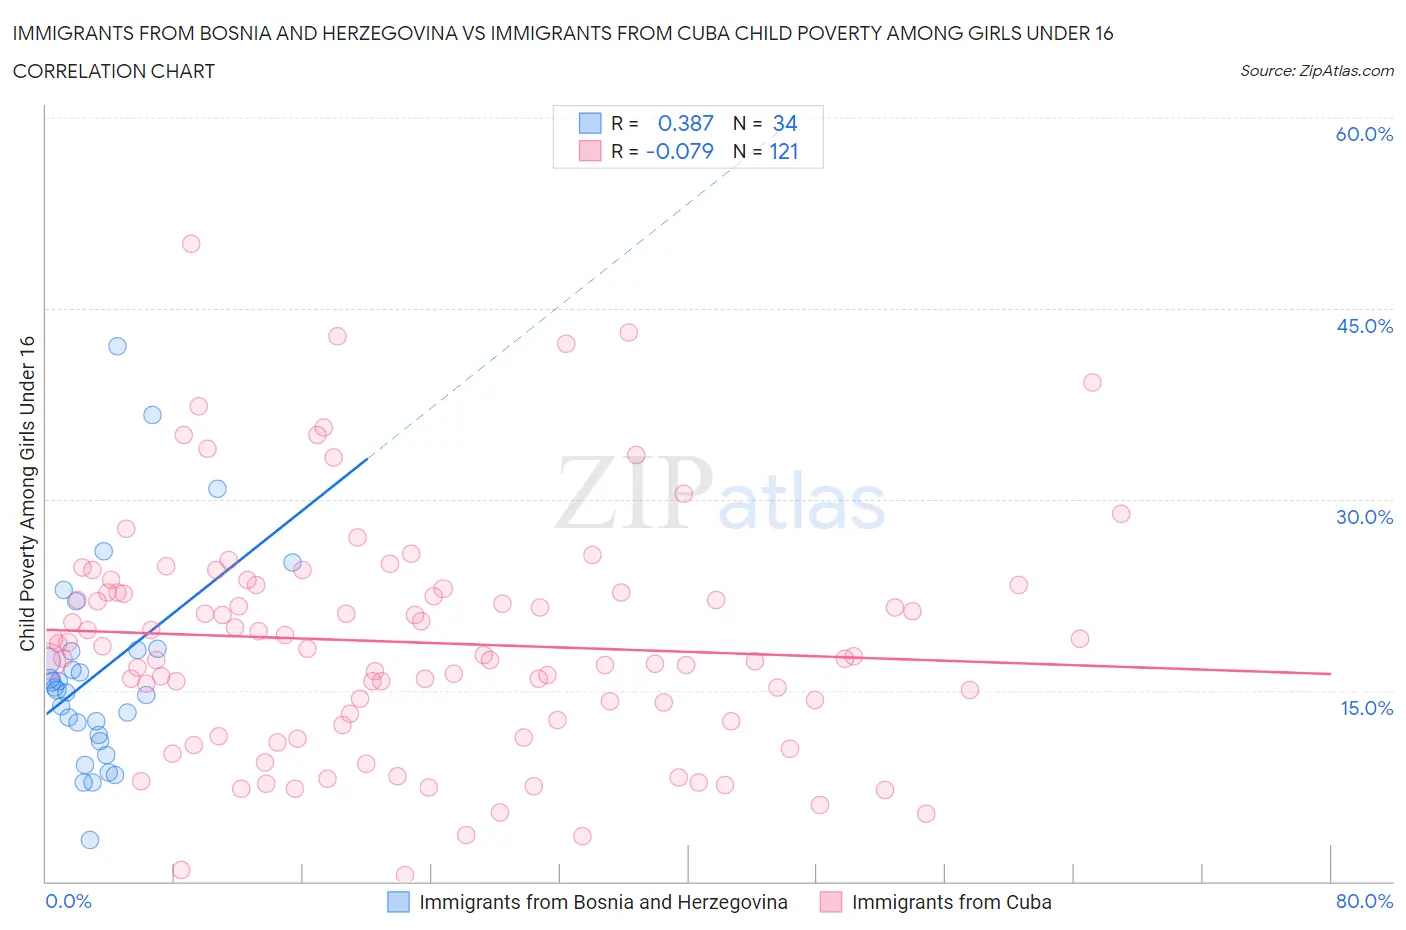 Immigrants from Bosnia and Herzegovina vs Immigrants from Cuba Child Poverty Among Girls Under 16